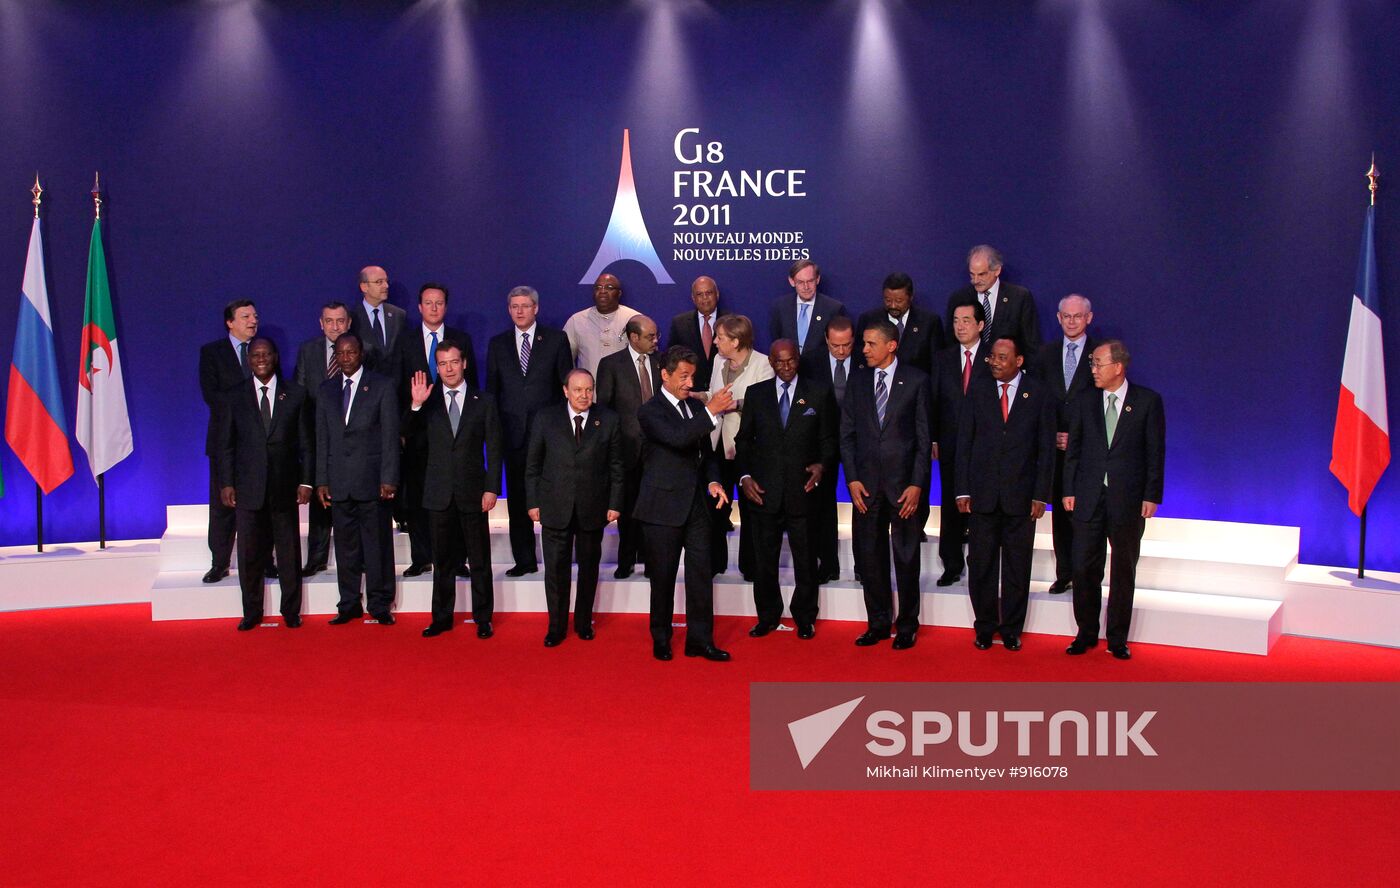 Dmitry Medvedev attends G8 summit in Deauville. Second day